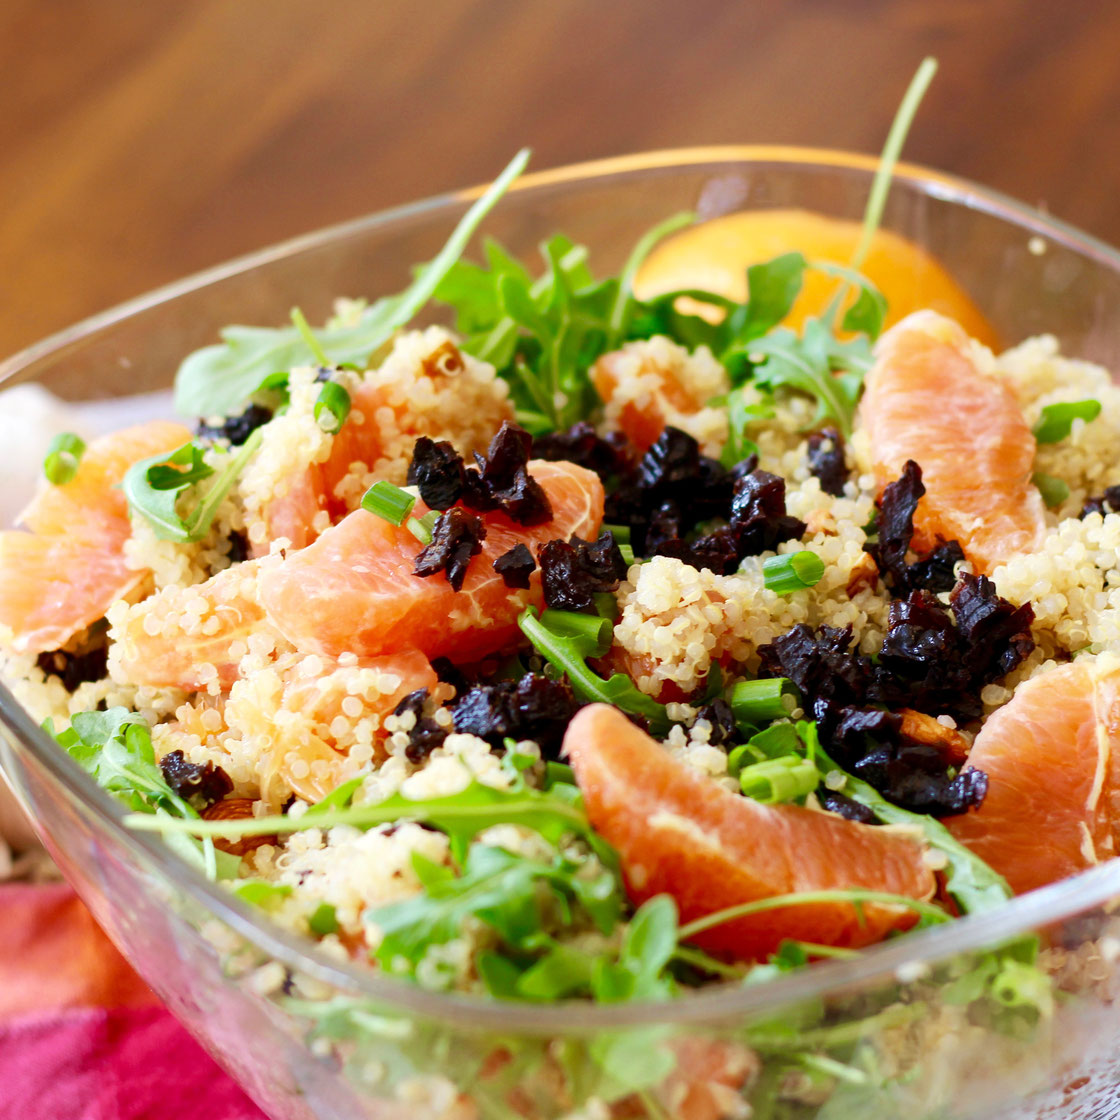 looking-for-healthy-salad-recipes-this-citrus-quinoa-salad-with-prunes-is-perfect-for-summer-and-is-loaded-with-arugula-and-fruit.jpg